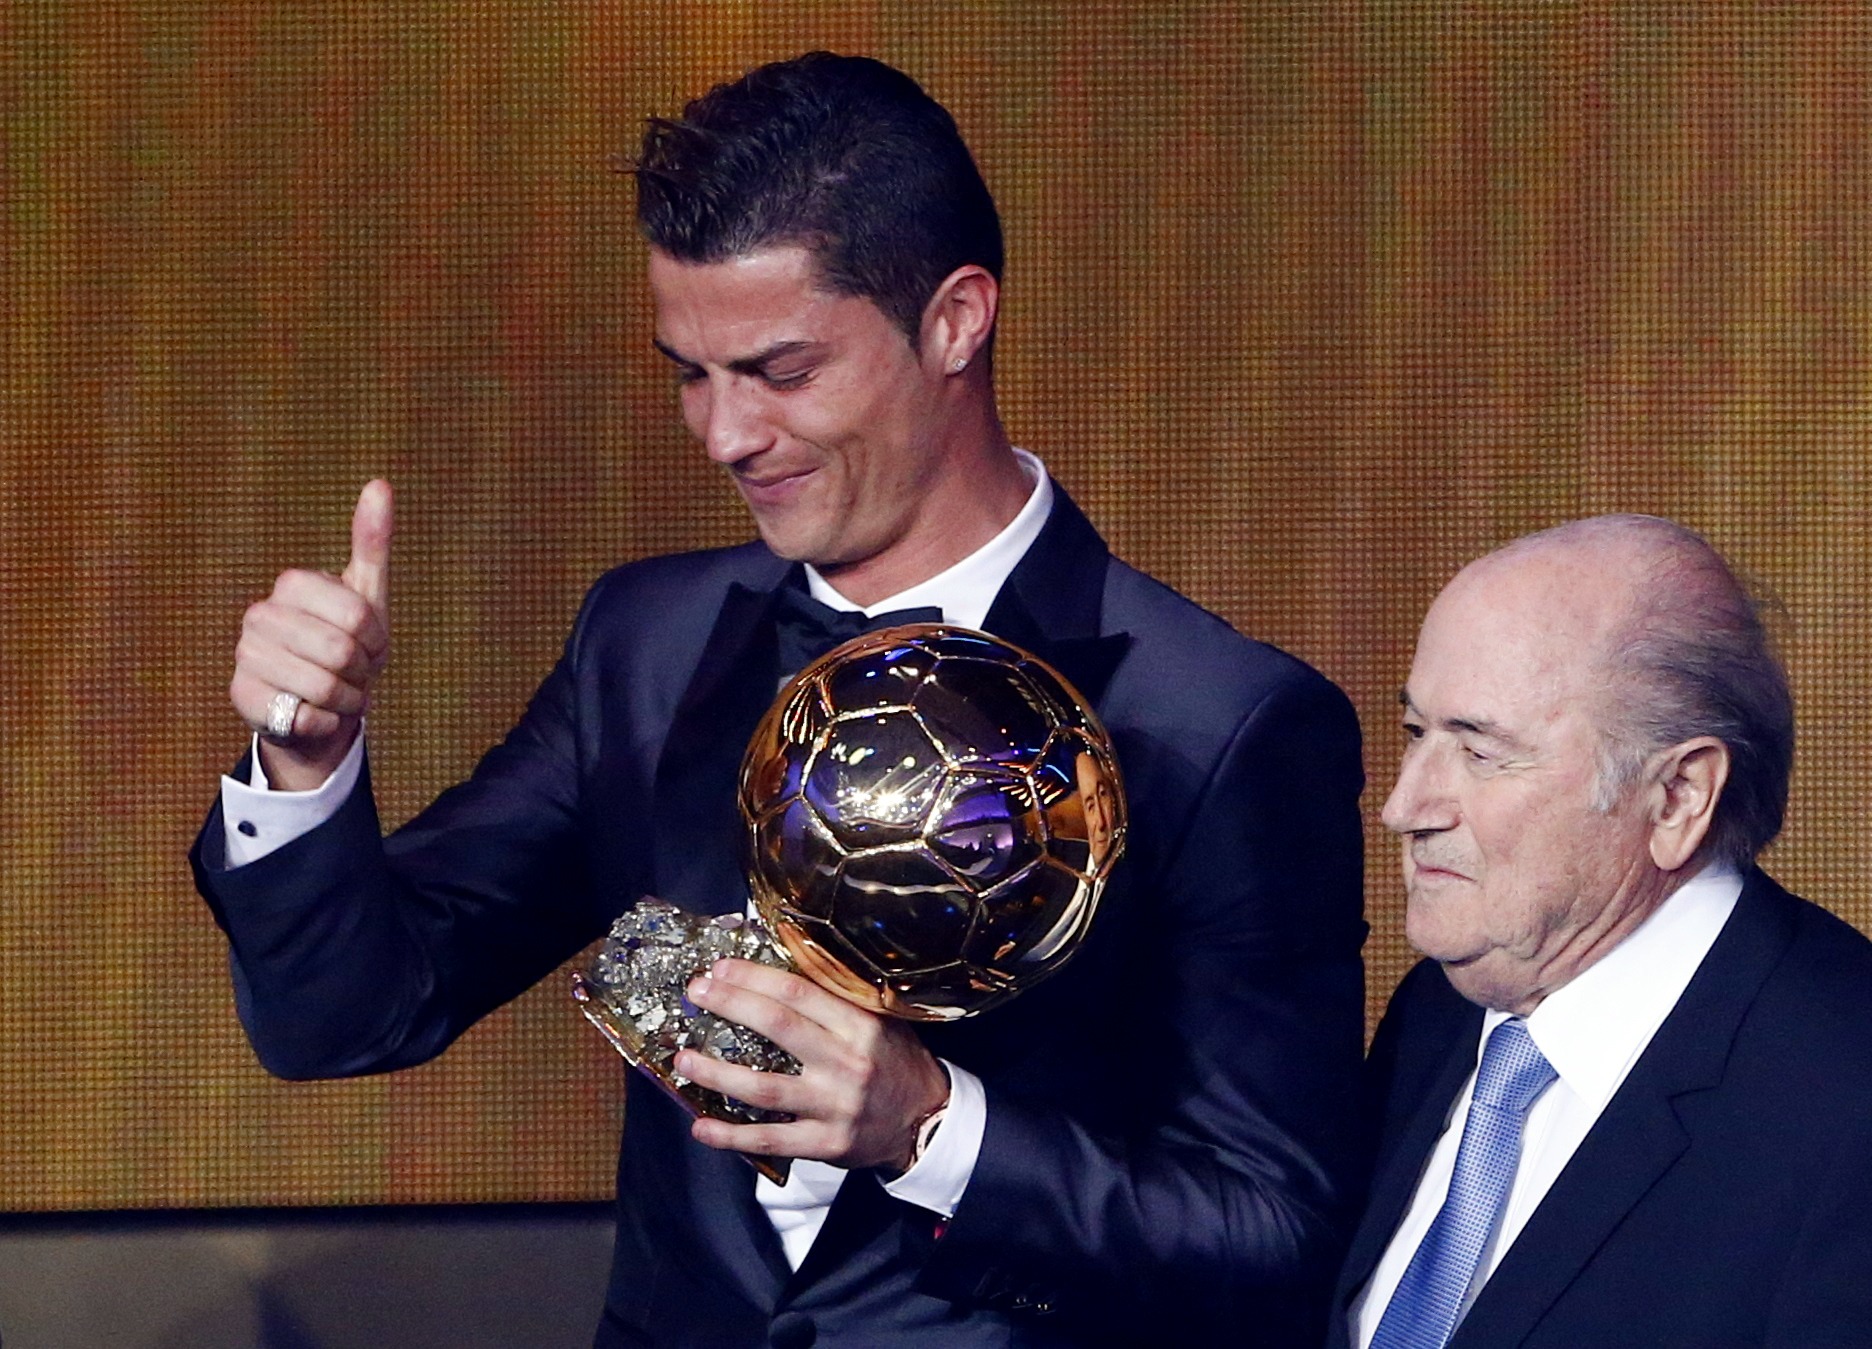 Ronaldo wins world player of the year for second time